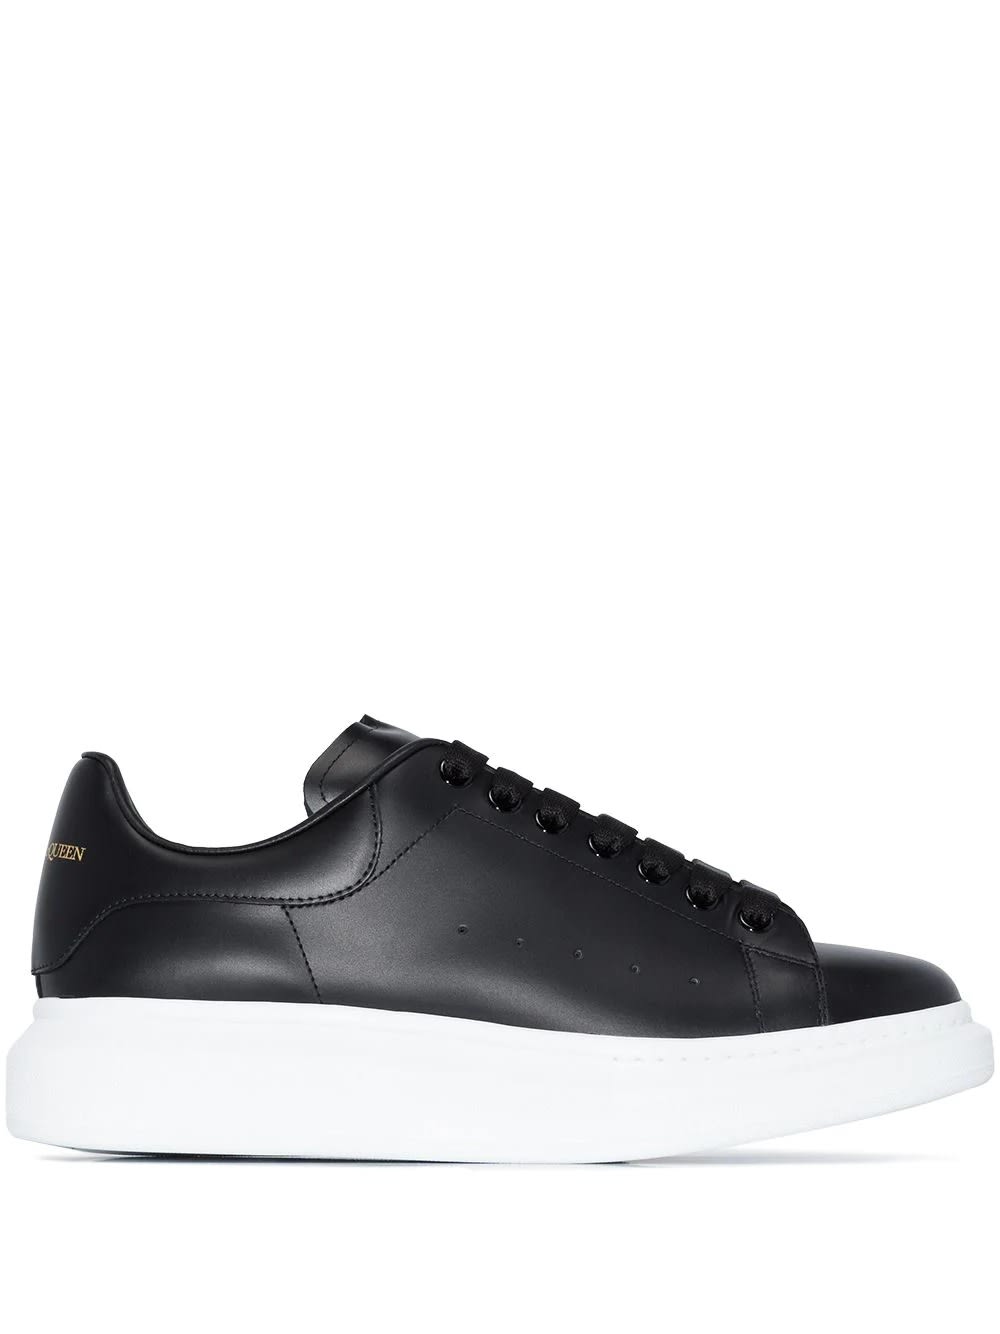 ALEXANDER MCQUEEN BLACK OVERSIZE SNEAKERS WITH WHITE SOLE